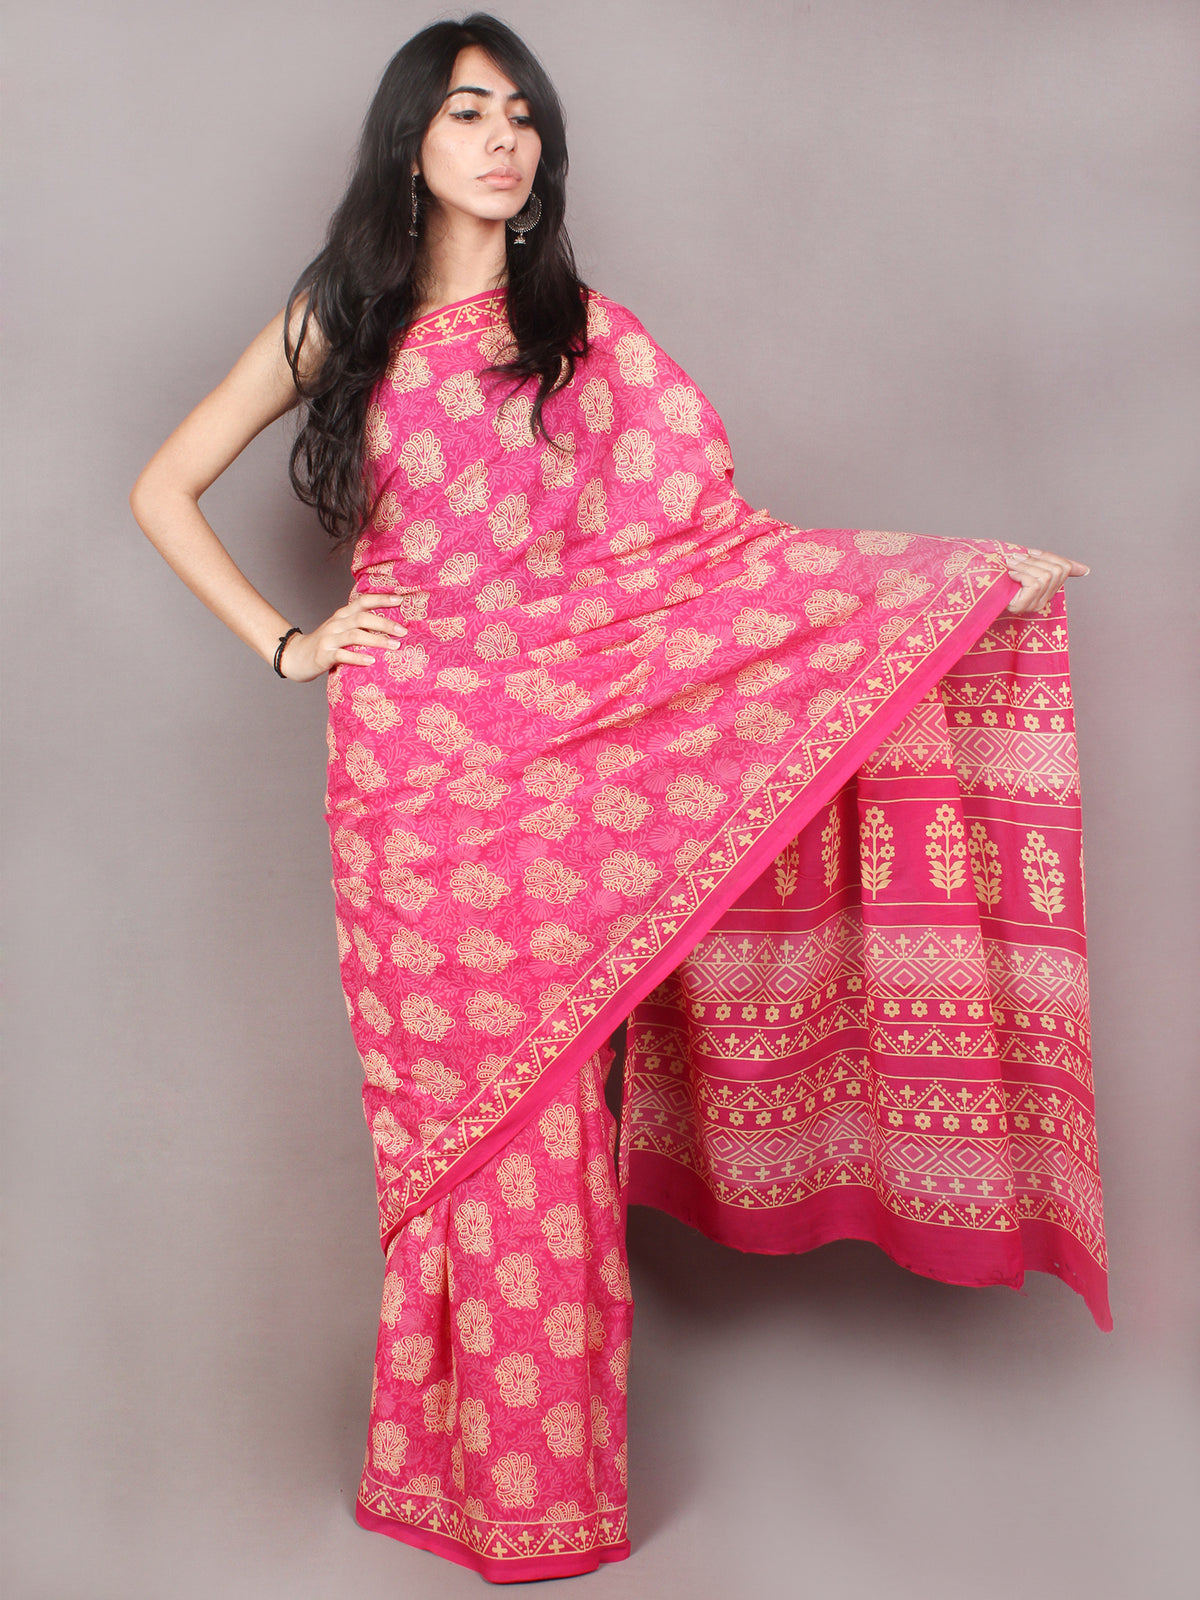 Pink Yellow White Block Printed in Natural Colors Cotton Mul Saree - S03170801